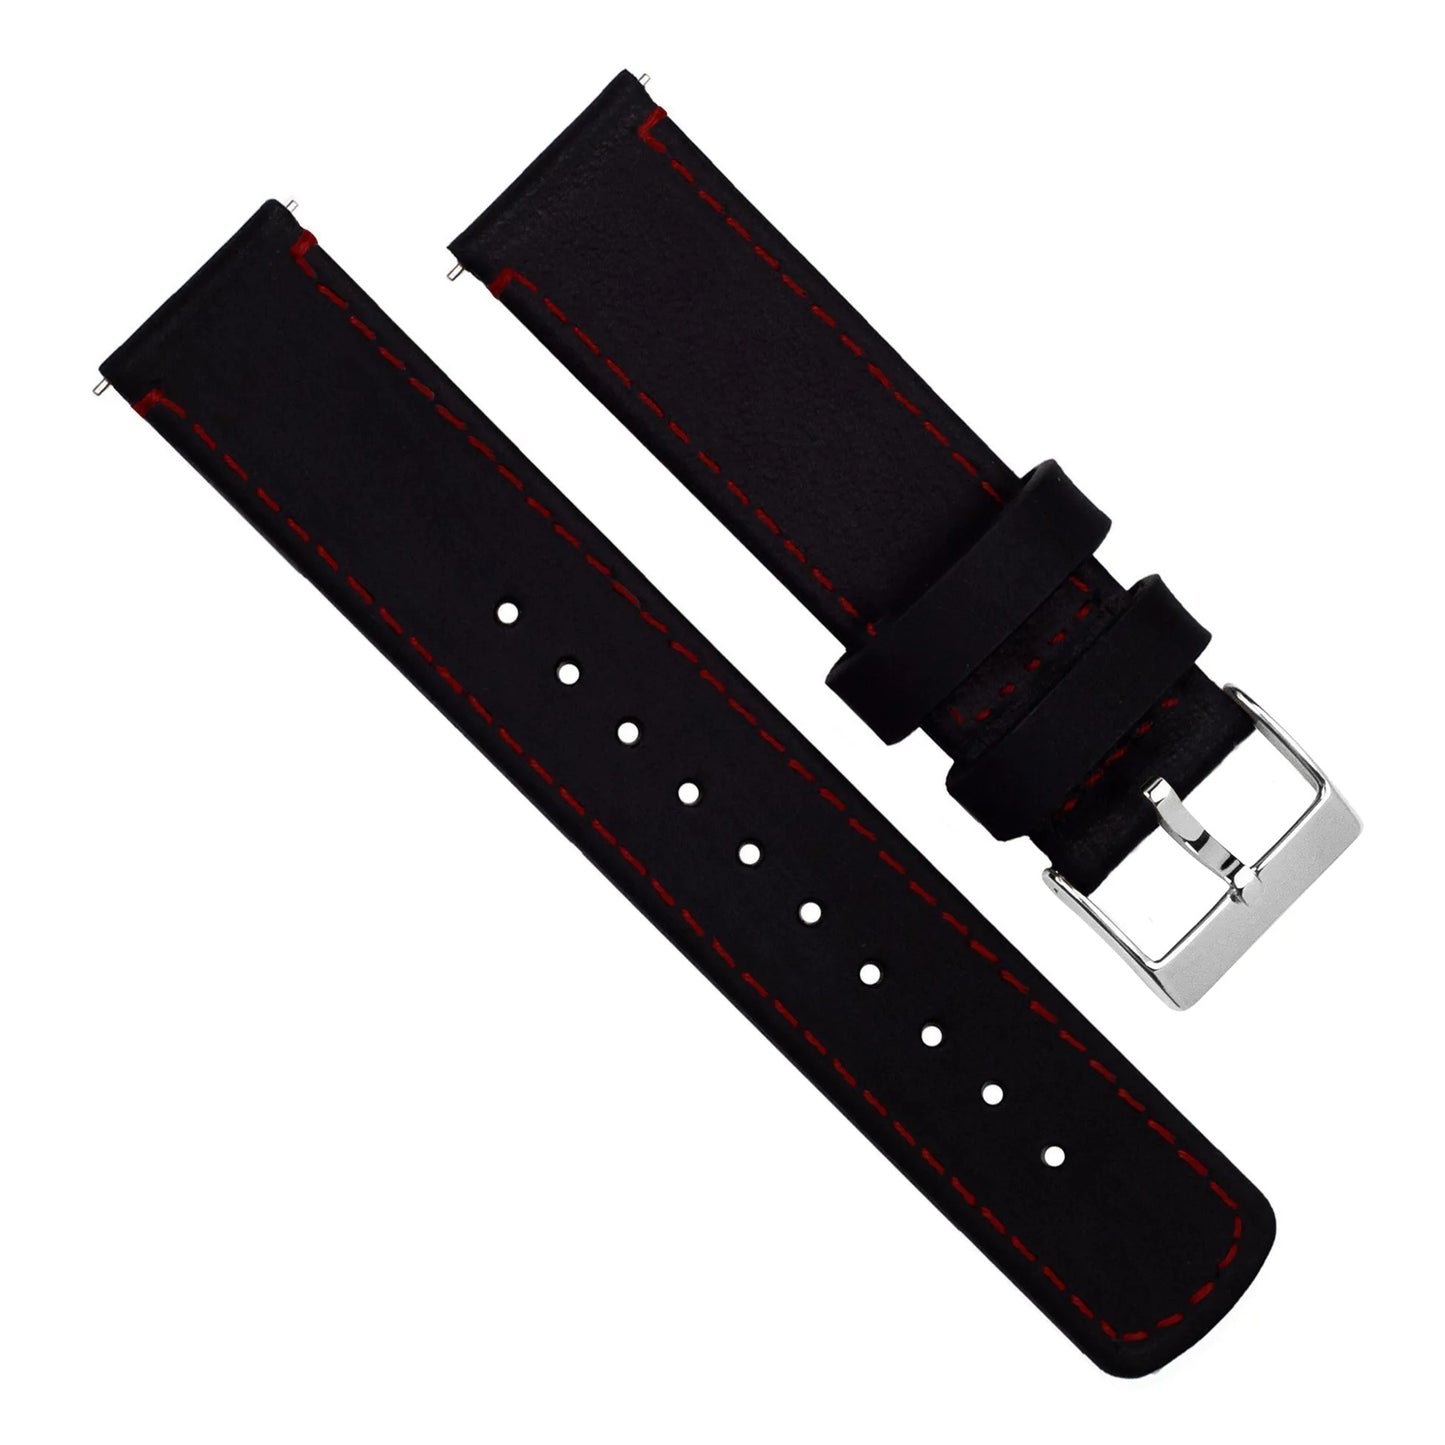 Timex Weekender Expedition Watches Black Leather Crimson Red Stitching Watch Band